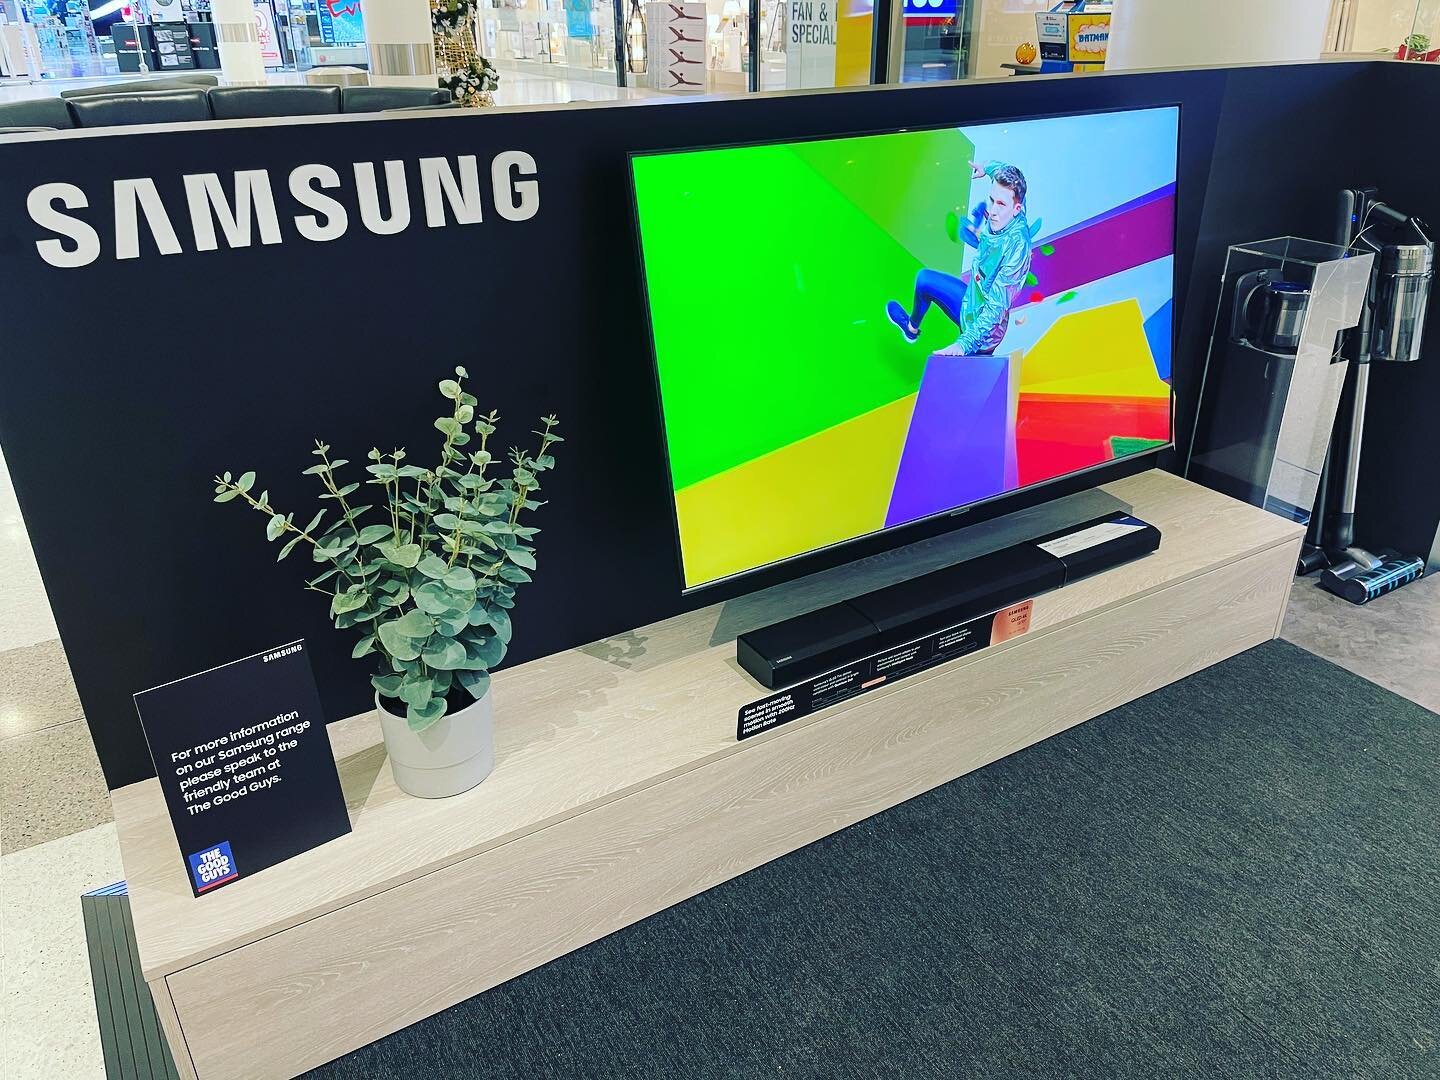 Great range of Samsung products showcased at The Good Guys Supa Centre Moore Park #popupstore #custombuild #thedisplaybuilders #retailactivation #retailinstallation